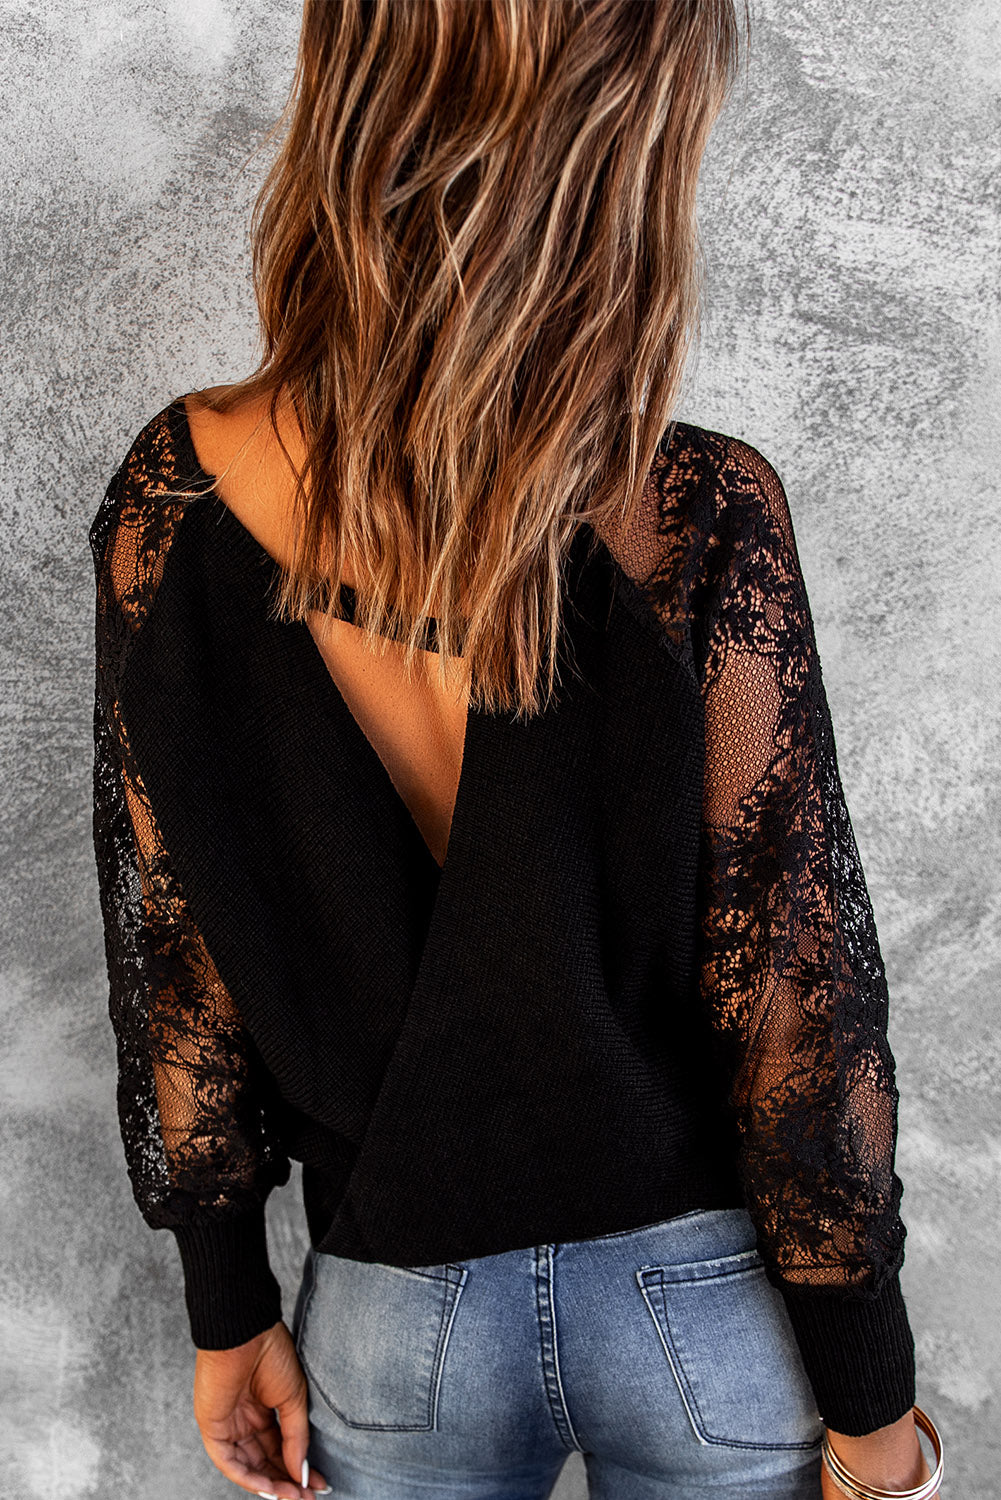 Black V Neck Surplice Hollow-out Lace Long Sleeves Sweater